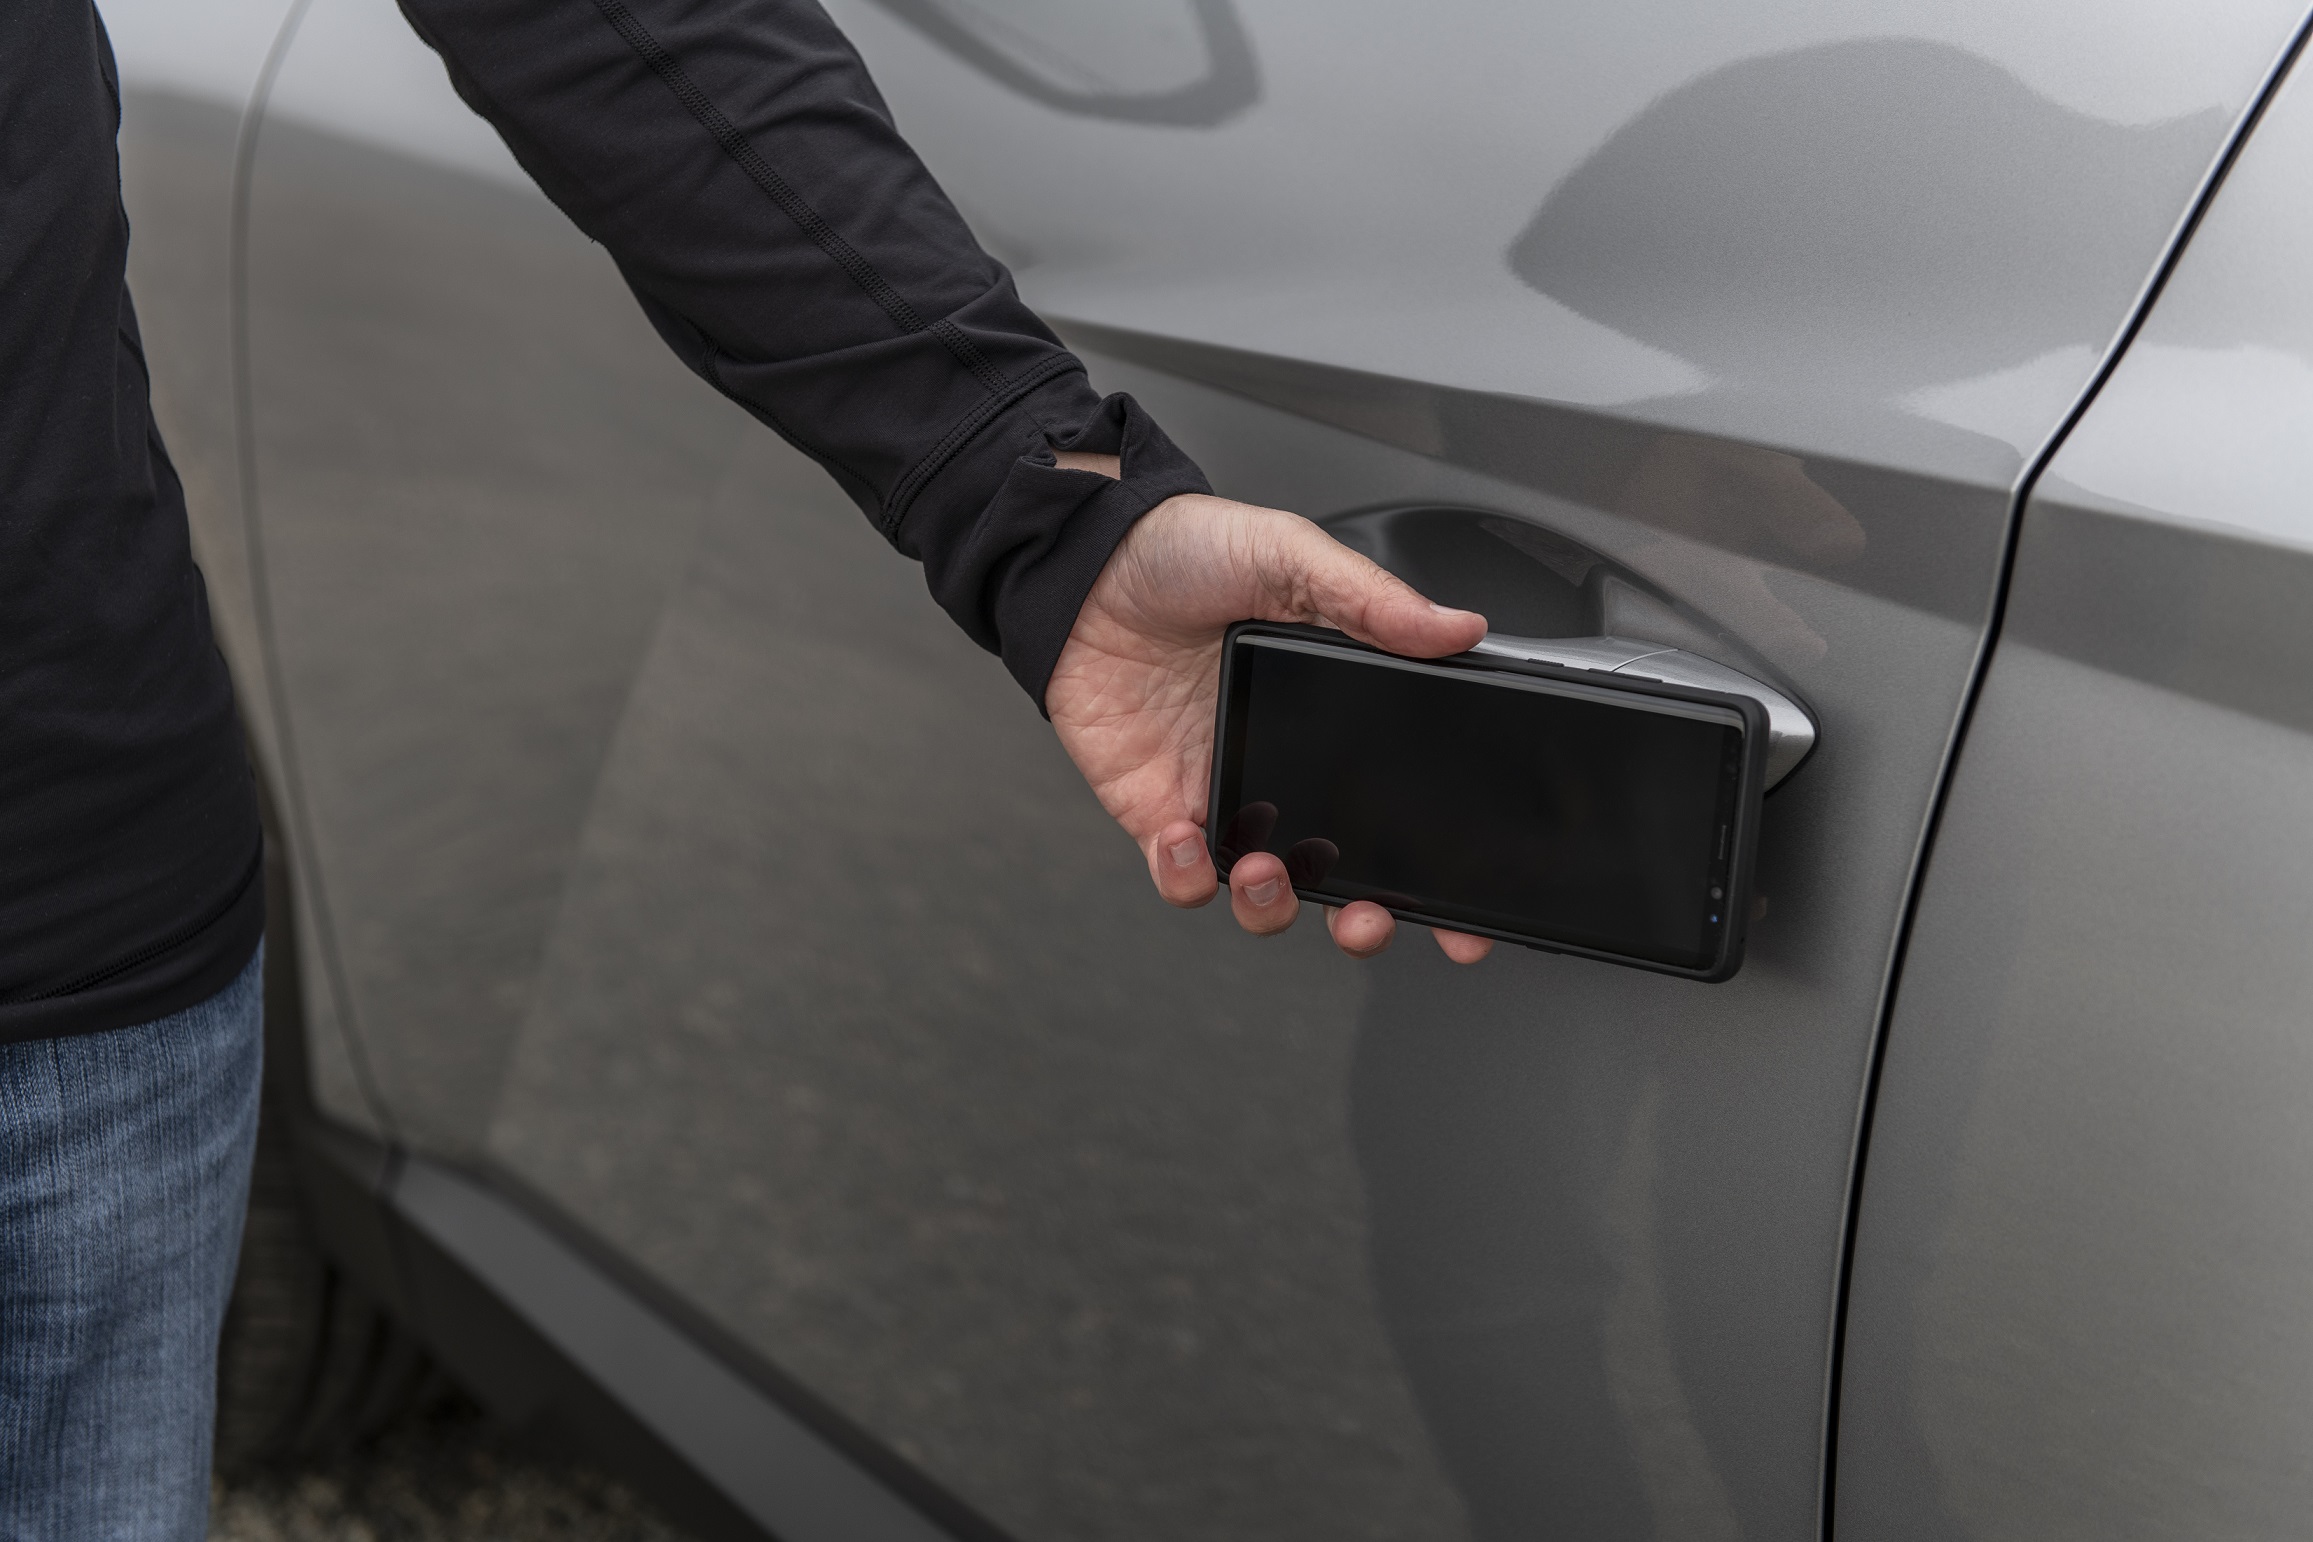 Smartphone app for accessing the vehicle